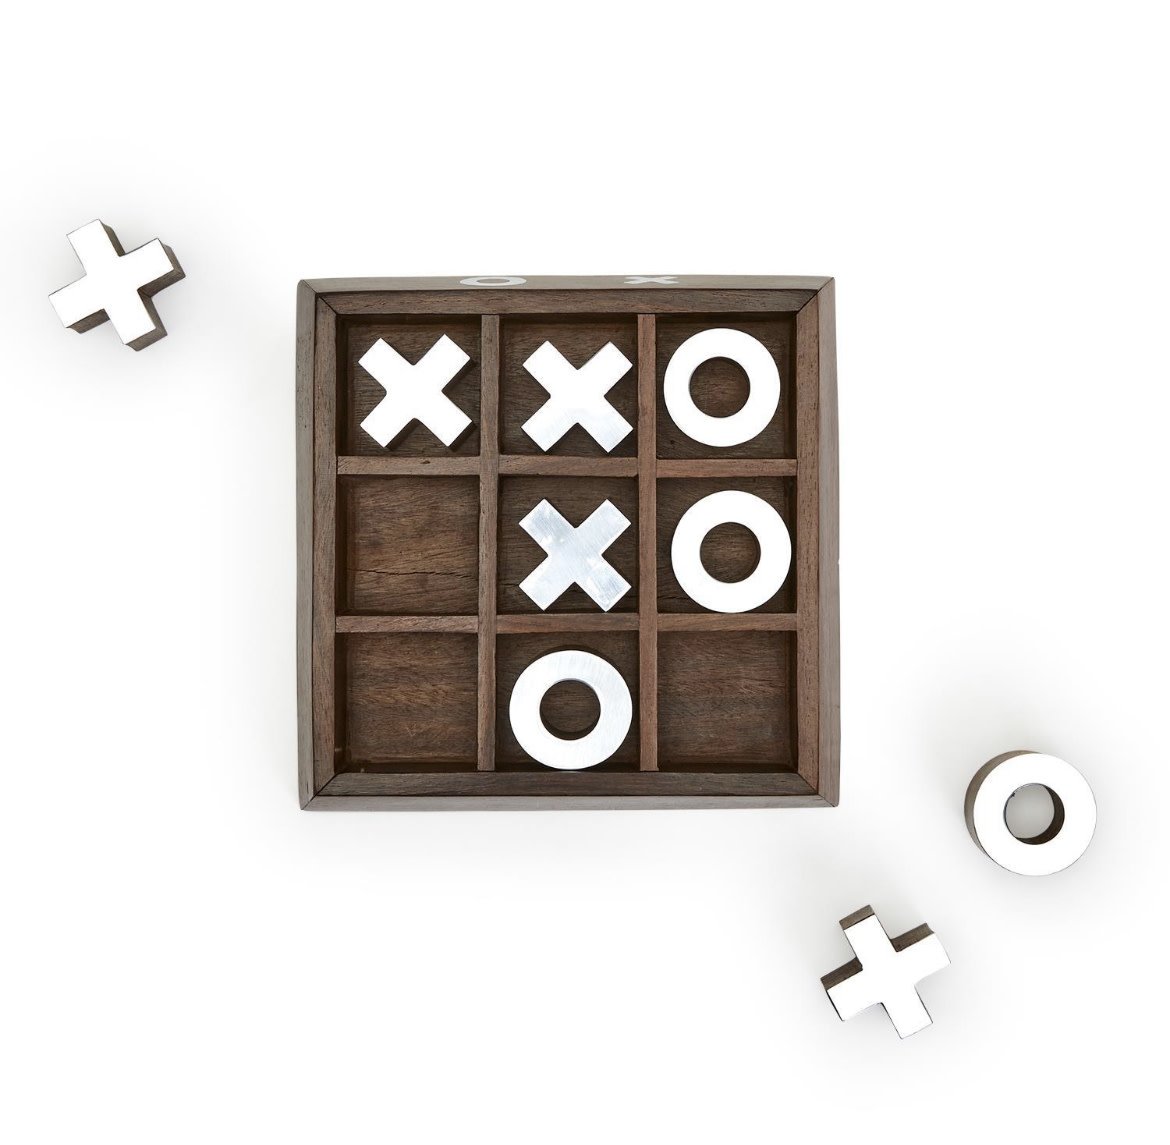 Twos Co Turf Club Hand-Crafted Tic-Tac-Toe Game